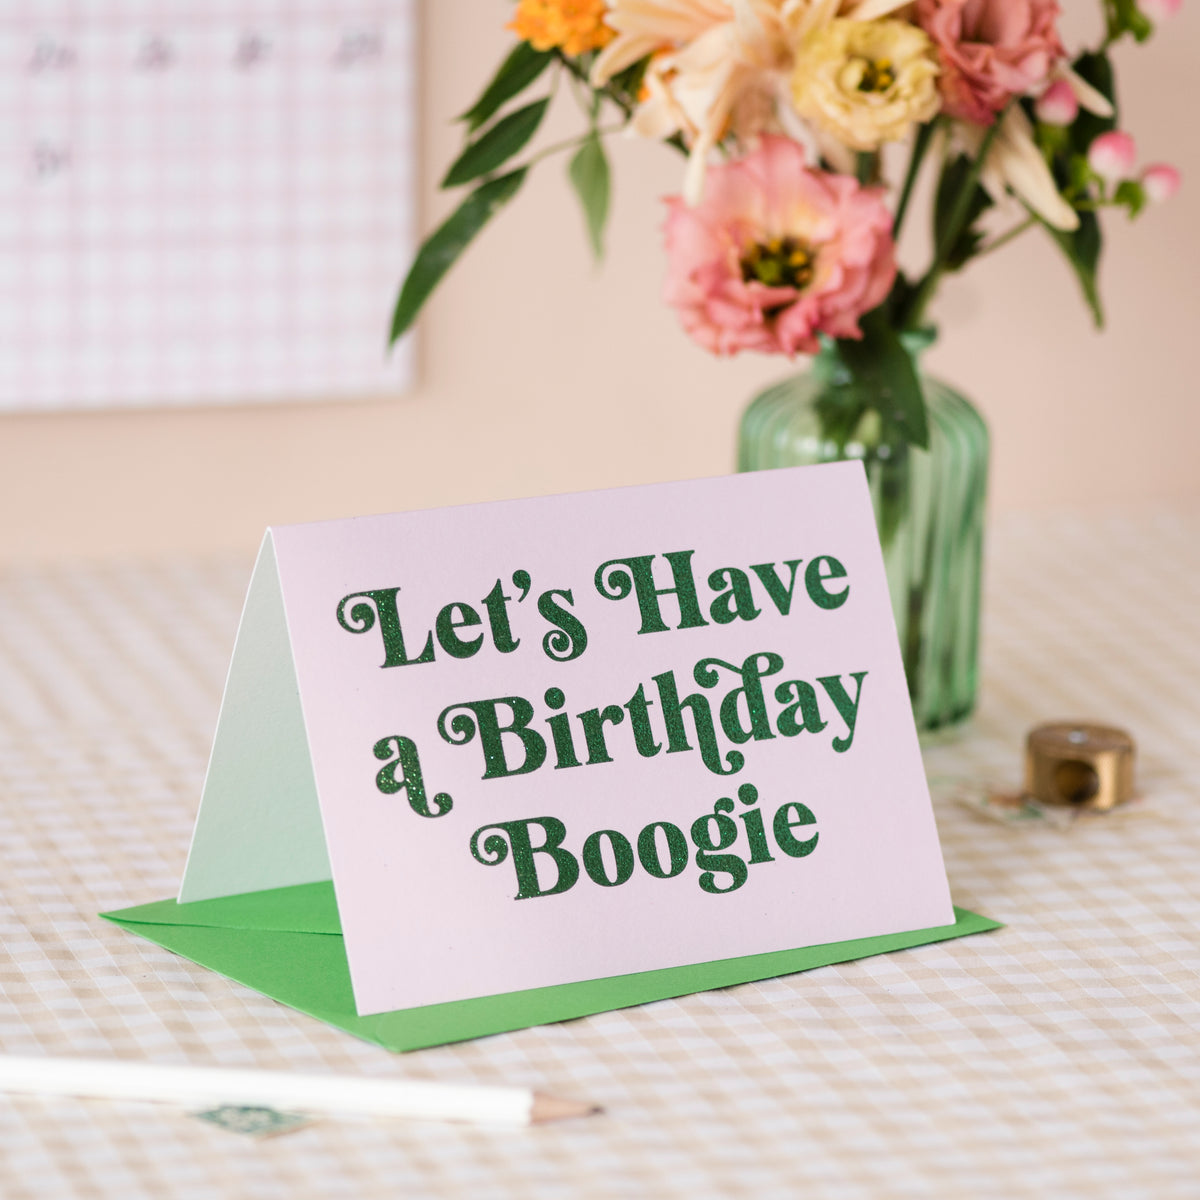 'Let's Have a Birthday Boogie' Greetings Card - Biodegradable Glitter